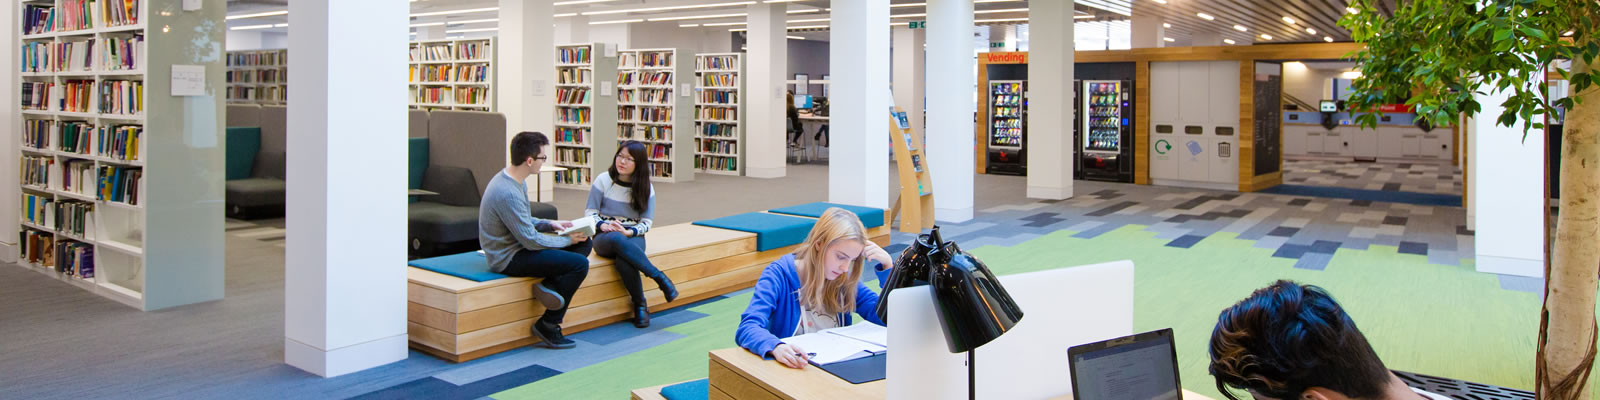 Student in the СʪƵ university library